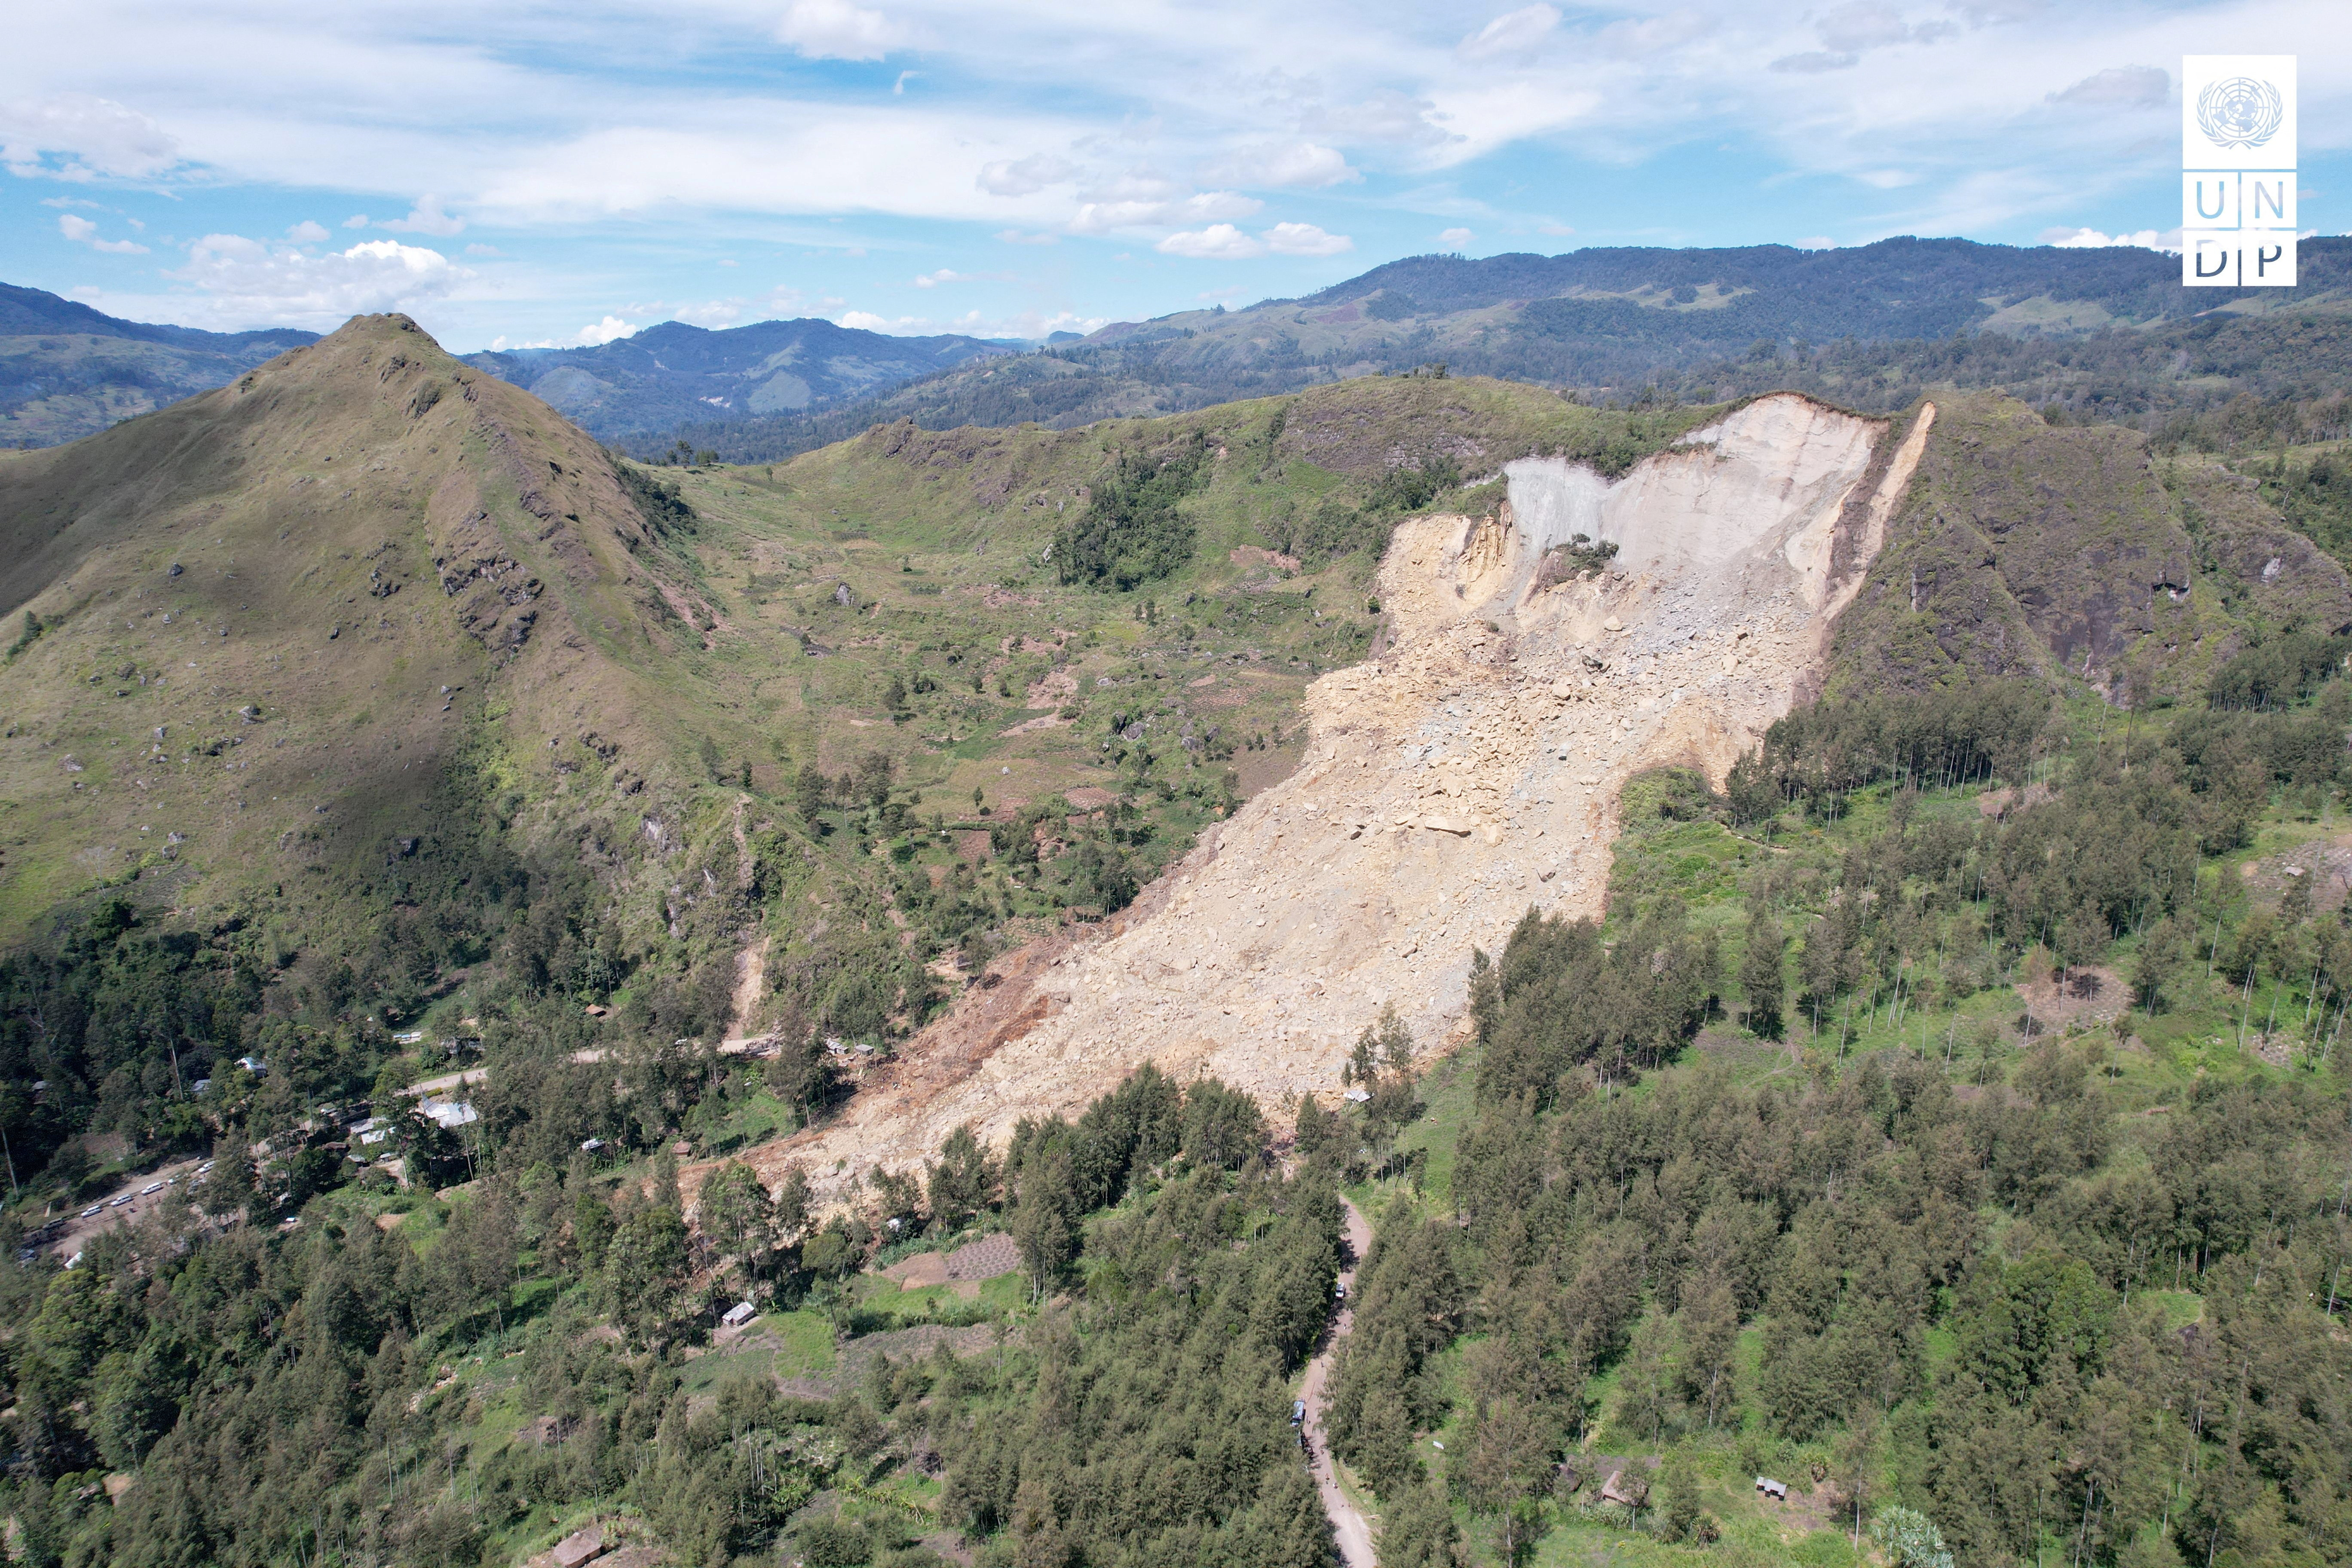 Aftermath of a landslide in Enga Province